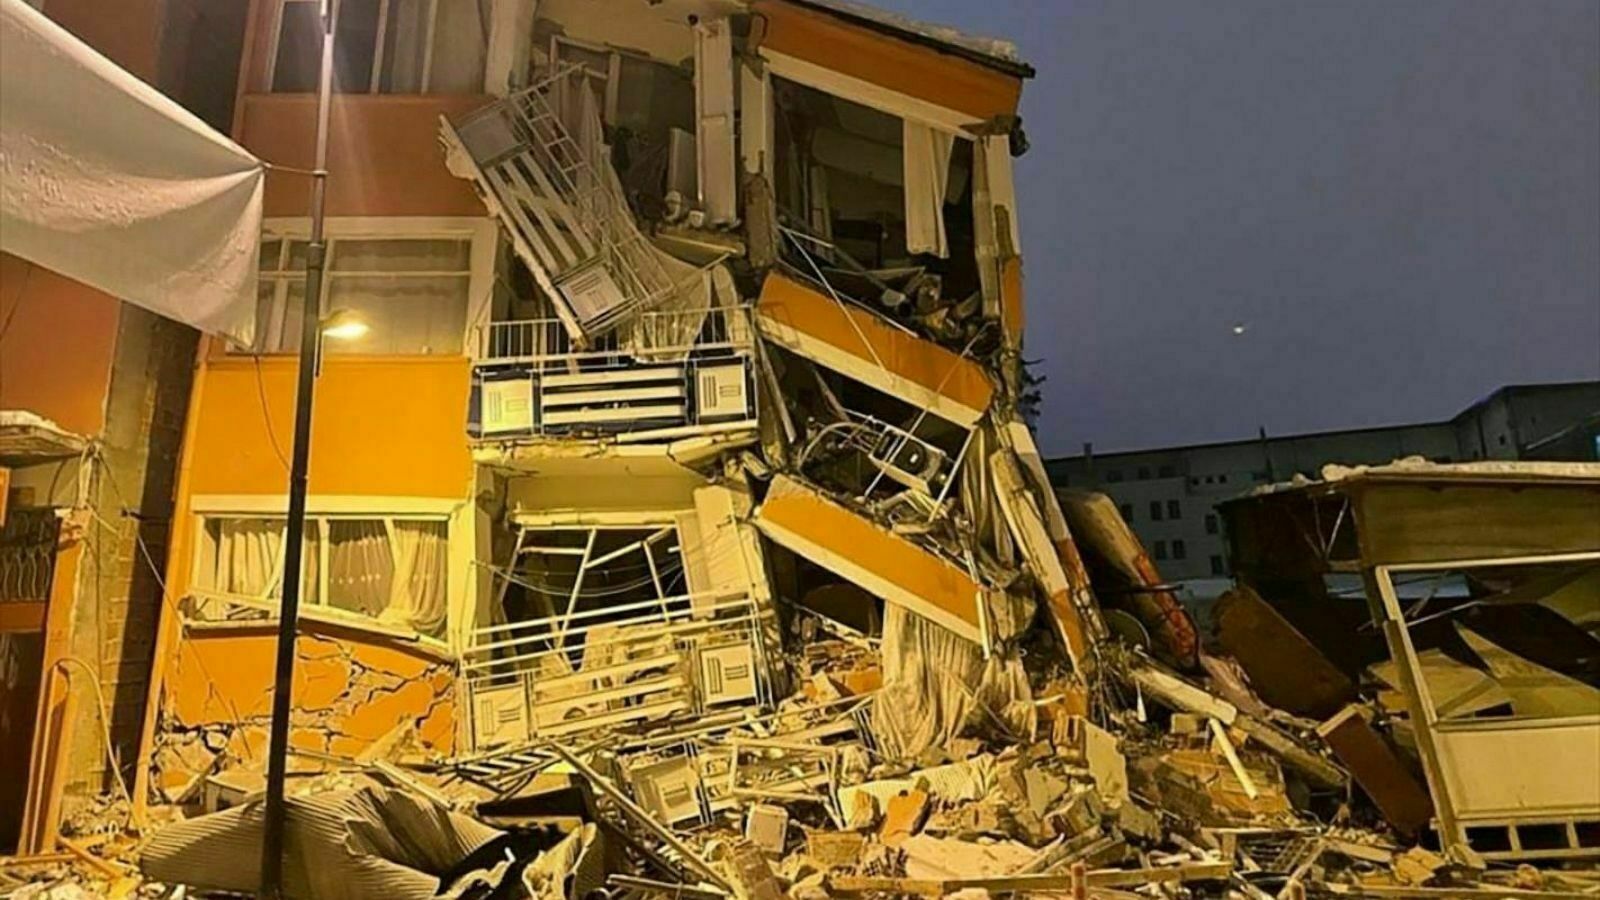 Hi-rise building collapsed live during a repeat earthquake in Turkey (VIDEO)